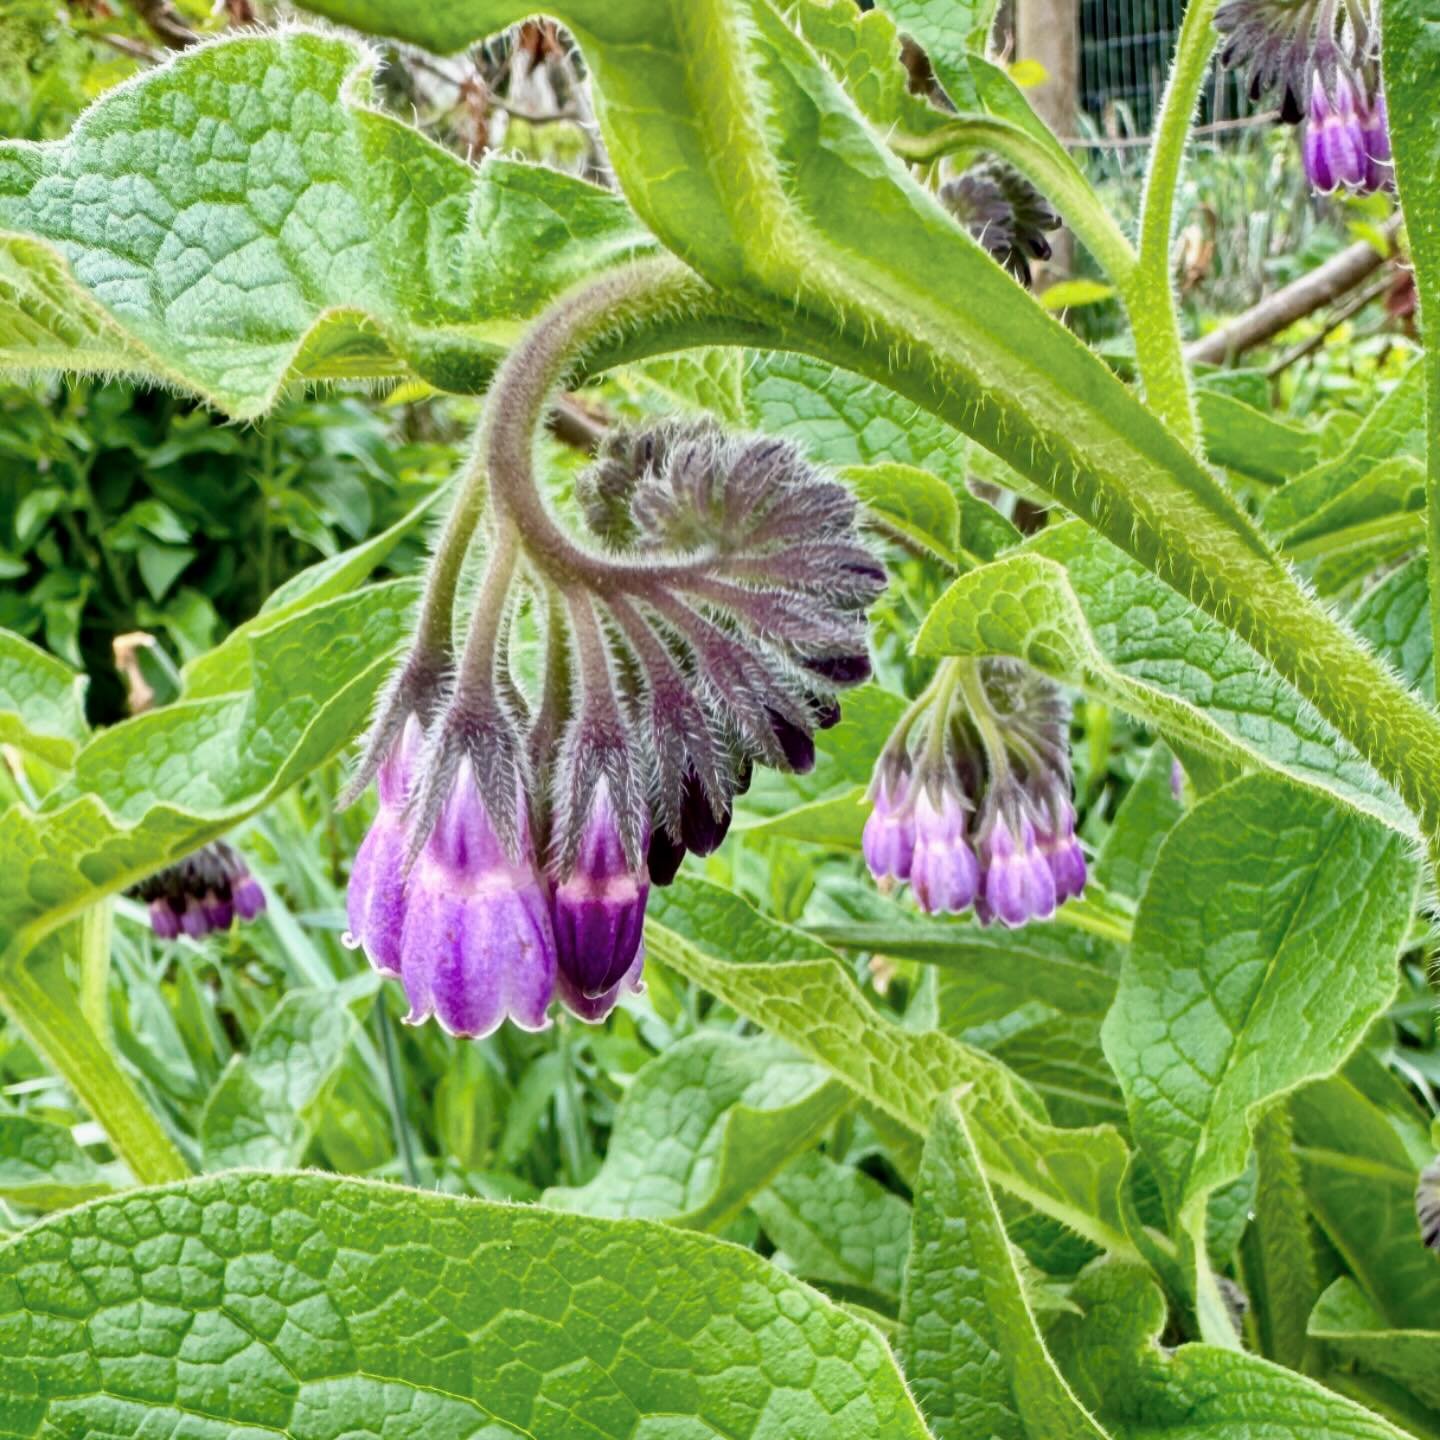 Comfrey. Compost superstar. Stunning flowers. Prolific grower so gearing up for the first batch of comfrey compost tea of the year 🌱🌱 trying a new method today, which involves not adding water at all, resulting in a highly concentrated liquid to di